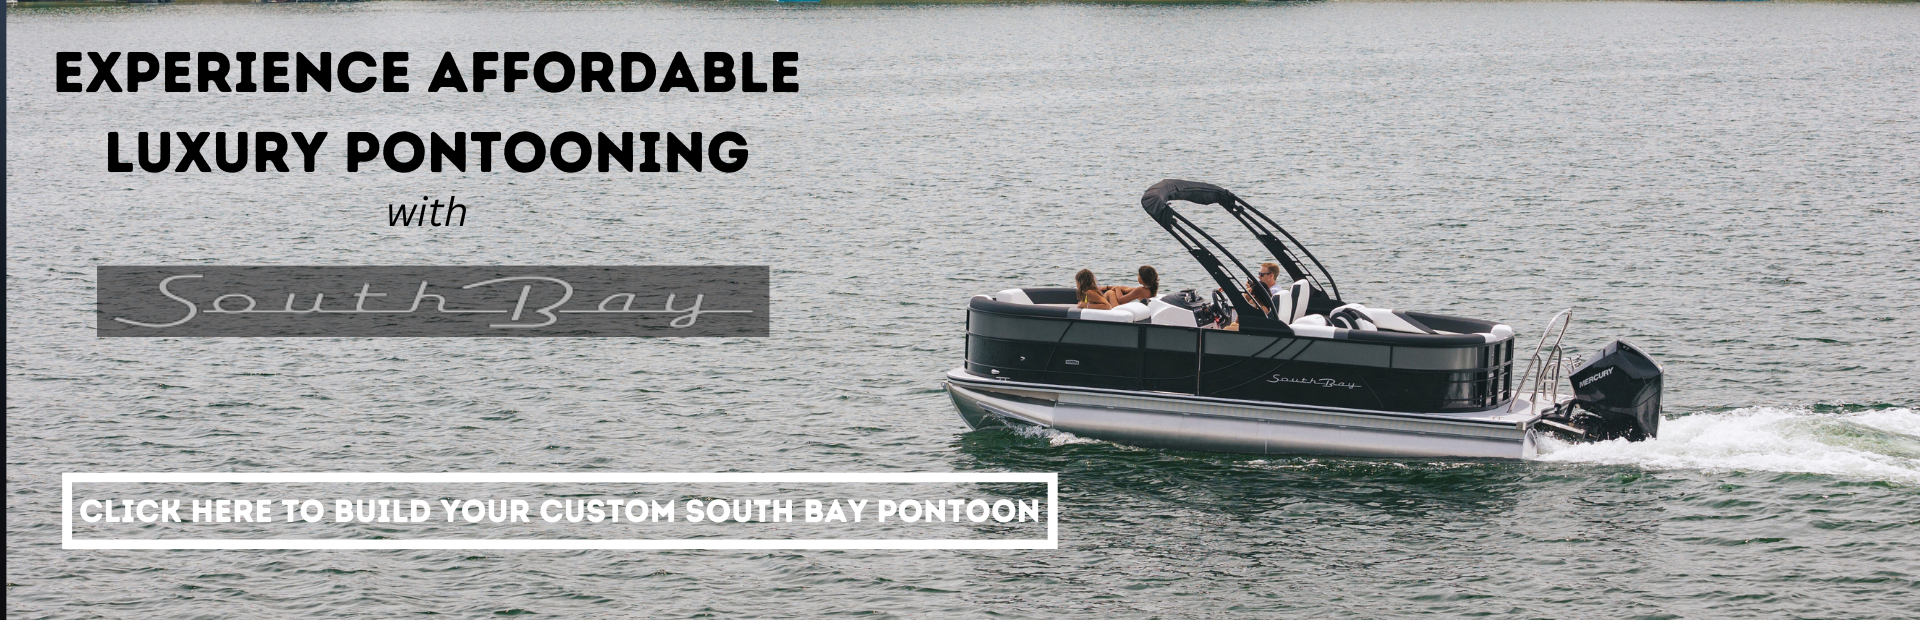 Experience Luxuring Affordable Pontooning With South Bay (2)